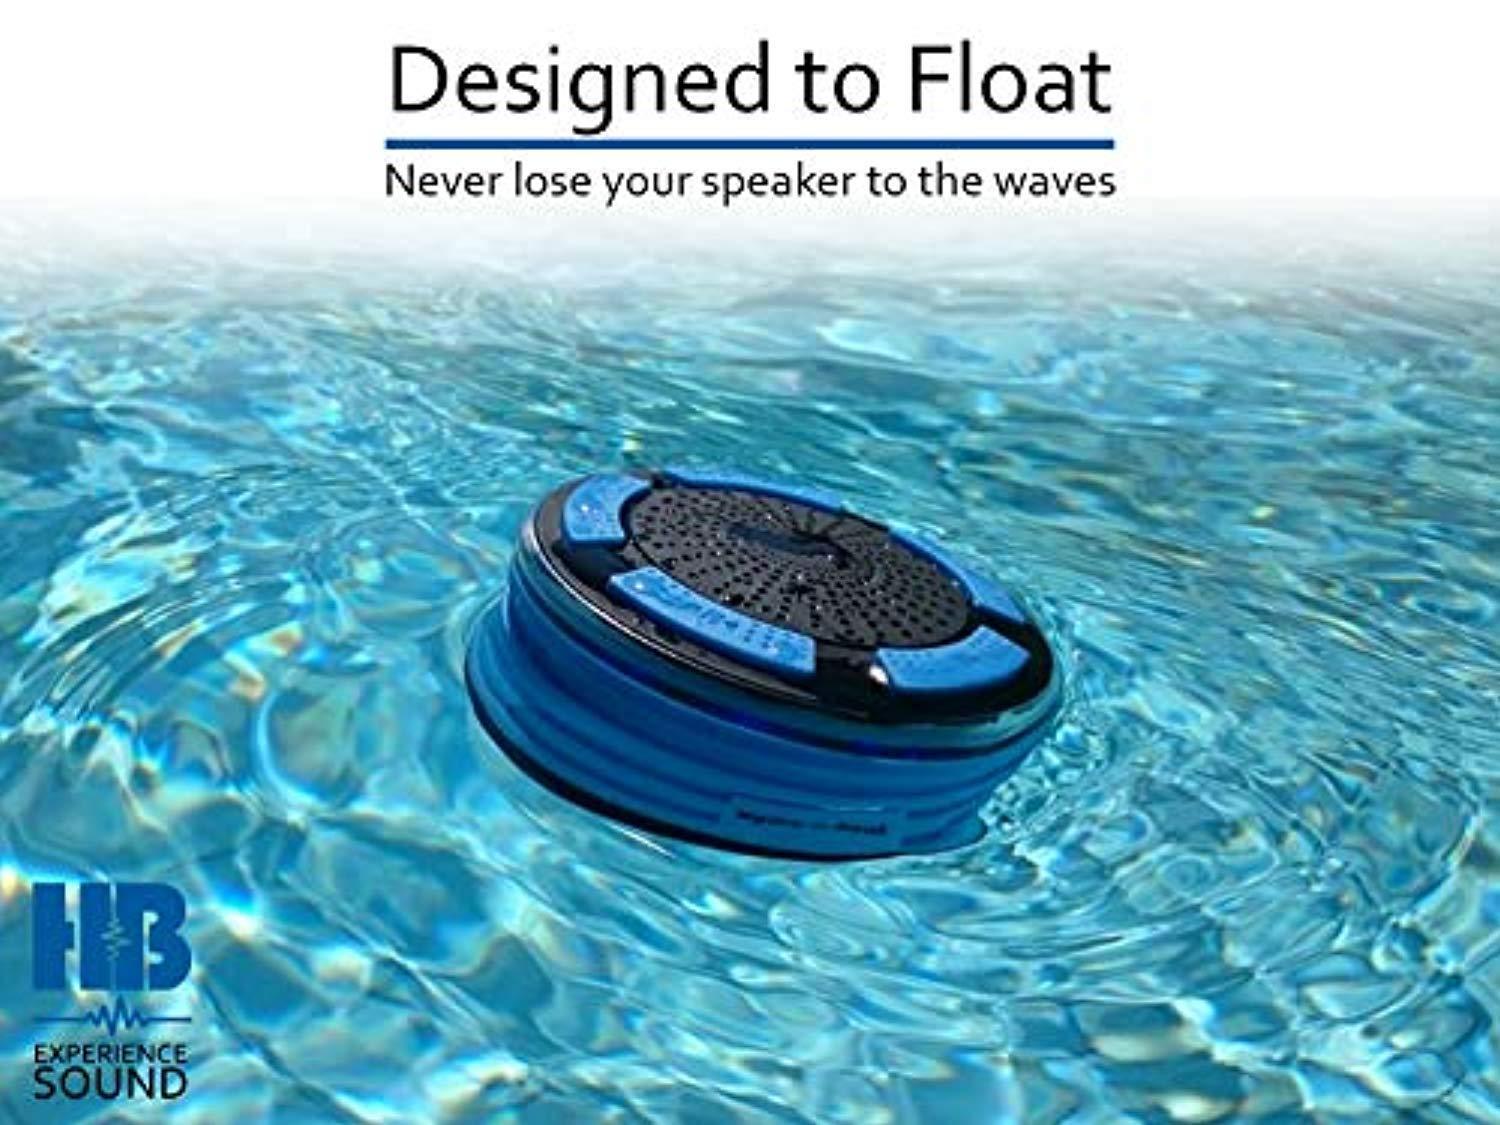 Bluetooth Portable Waterproof Shower Radio - HB Illumination – Shockproof, Dustproof Wireless Shower Radio with Suction Cup, Perfect for Pool, Shower, Boat, Beach, Hot Tub, Outdoors, Indoors